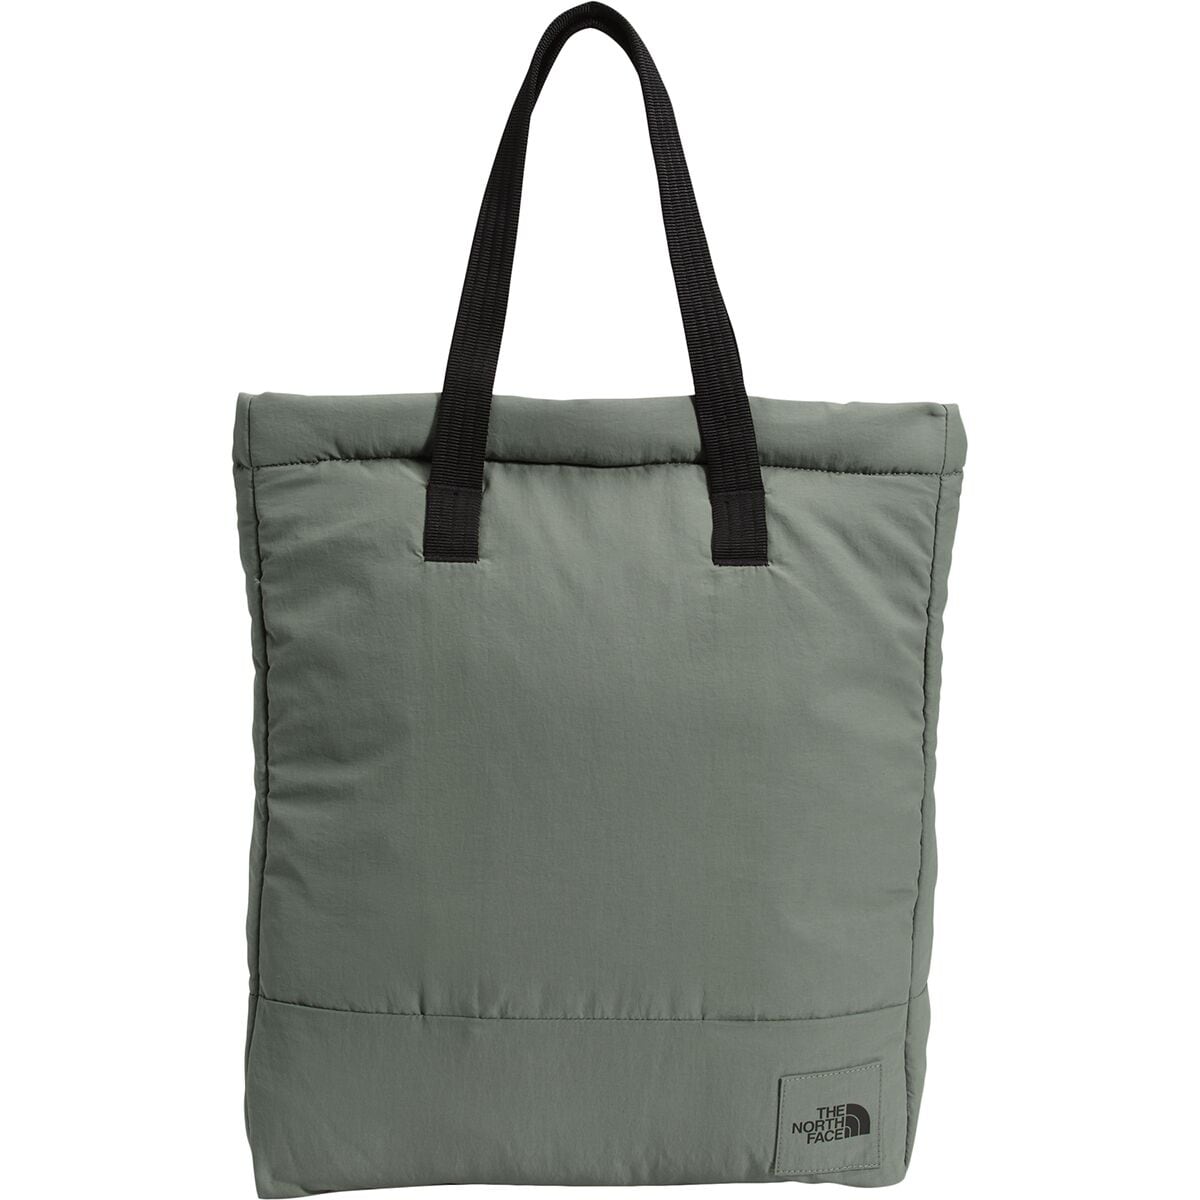 The North Face City Voyager Tote - Accessories